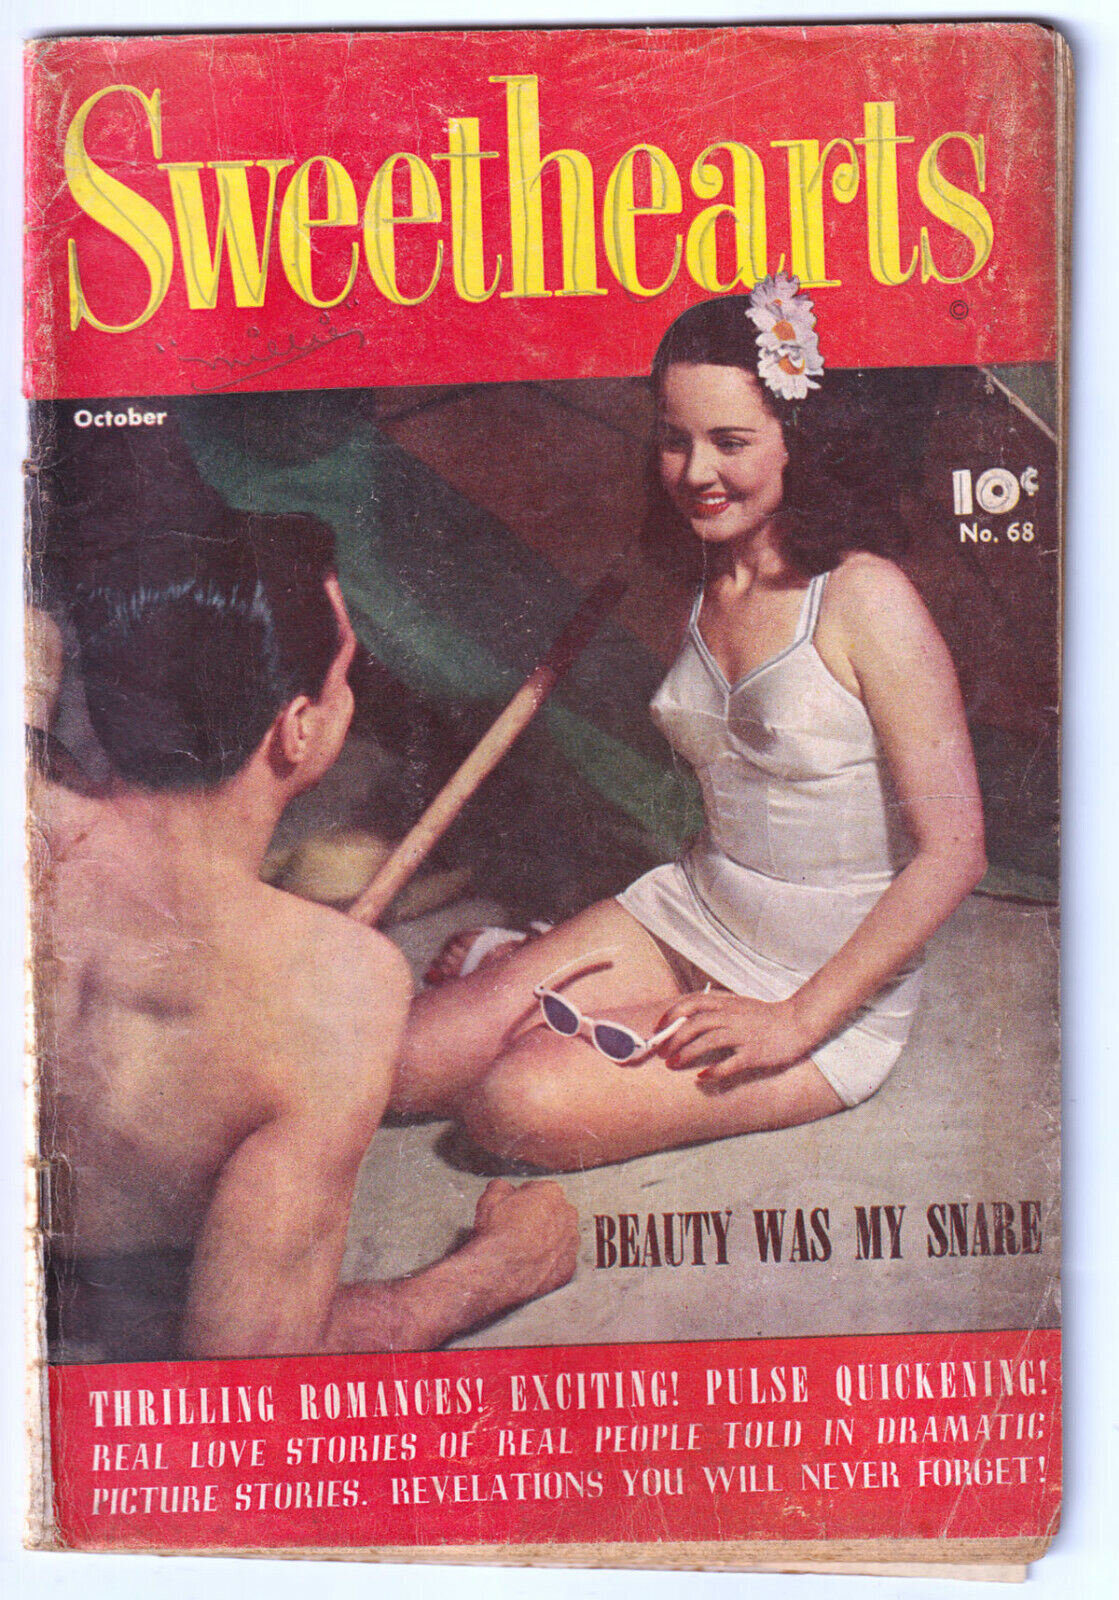 SWEETHEARTS 68 (#1, 1948) Very RARE 1st Issue; Only eBay; 1 CGC; GOOD 2.0